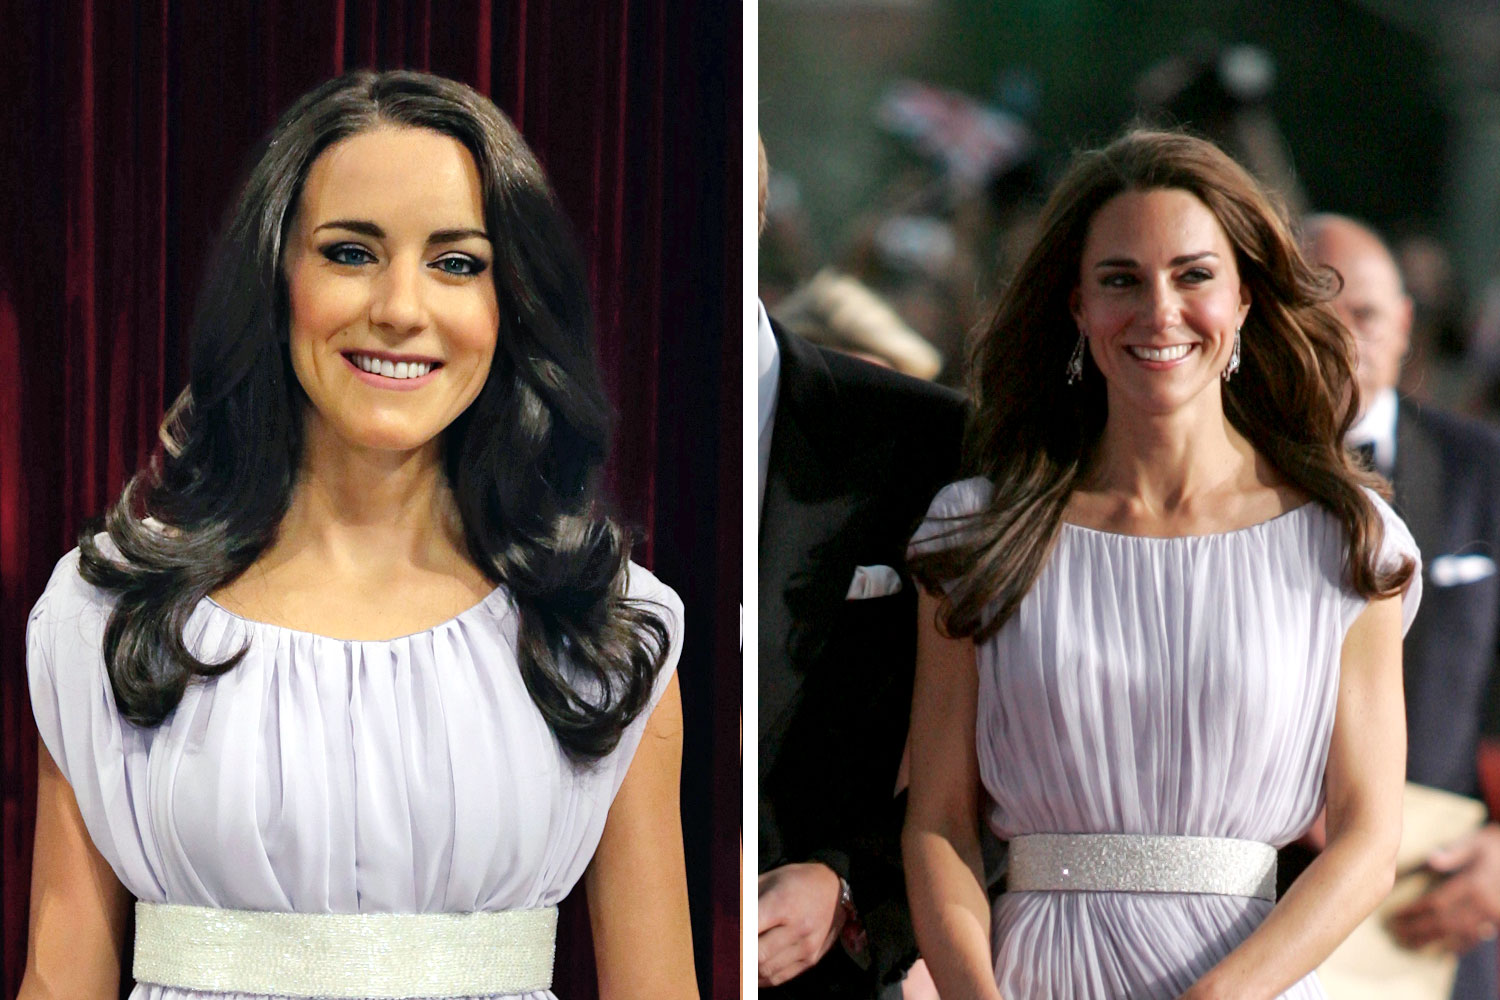 Left: A new wax figure of Catherine, Duchess of Cambridge at Madame Tussauds' wax museum in New York City on Oct. 23, 2014. Right: The Duchess wearing the one of a kind Alexander McQueen gown at the BAFTA Awards in Los Angeles on July 9, 2011.